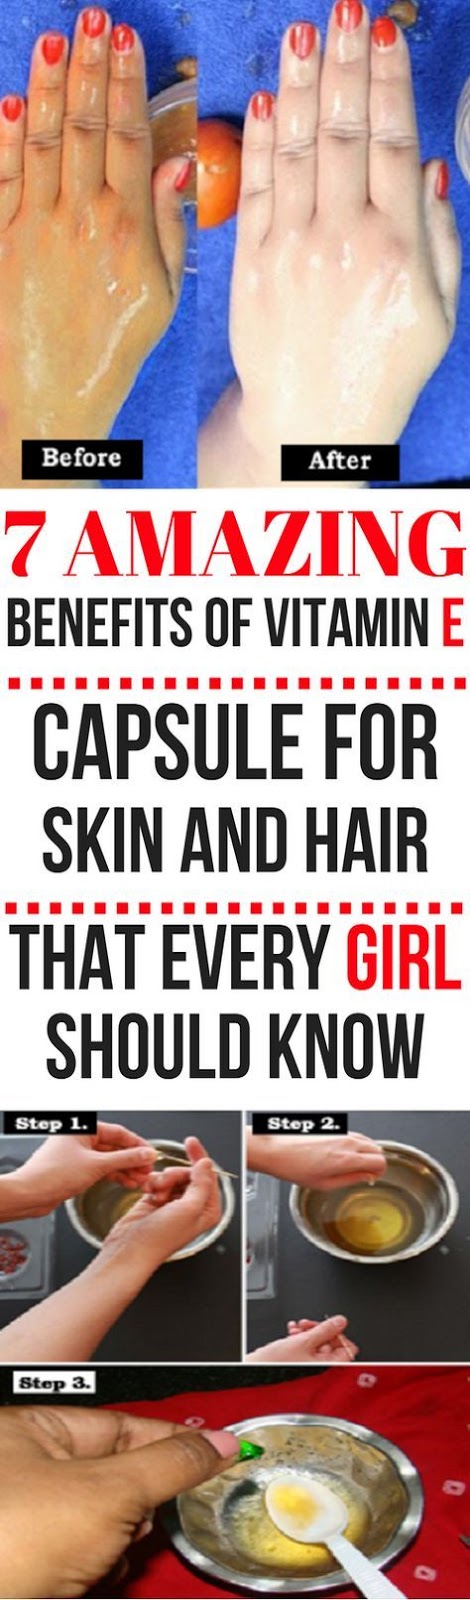 7 AMAZING BENEFITS OF VITAMIN E CAPSULE FOR SKIN AND HAIR THAT EVERY ...